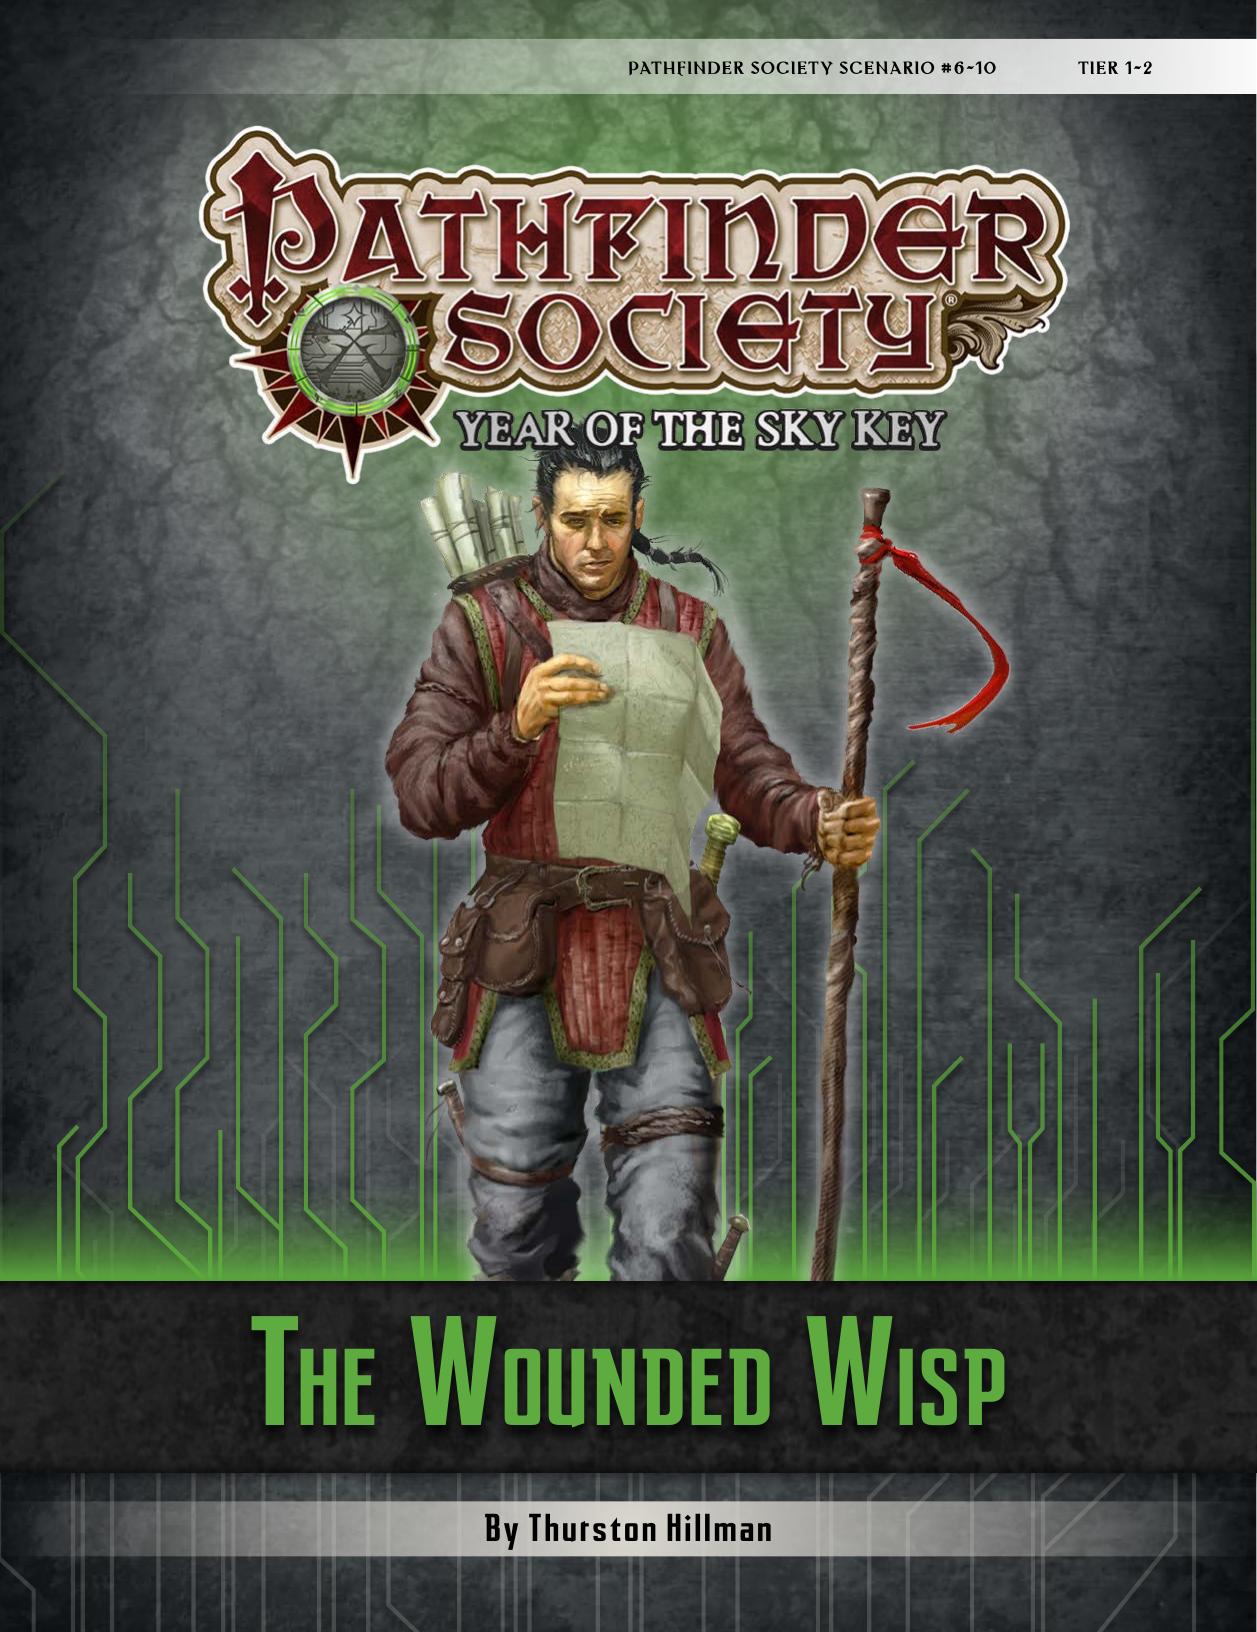 The Wounded Wisp